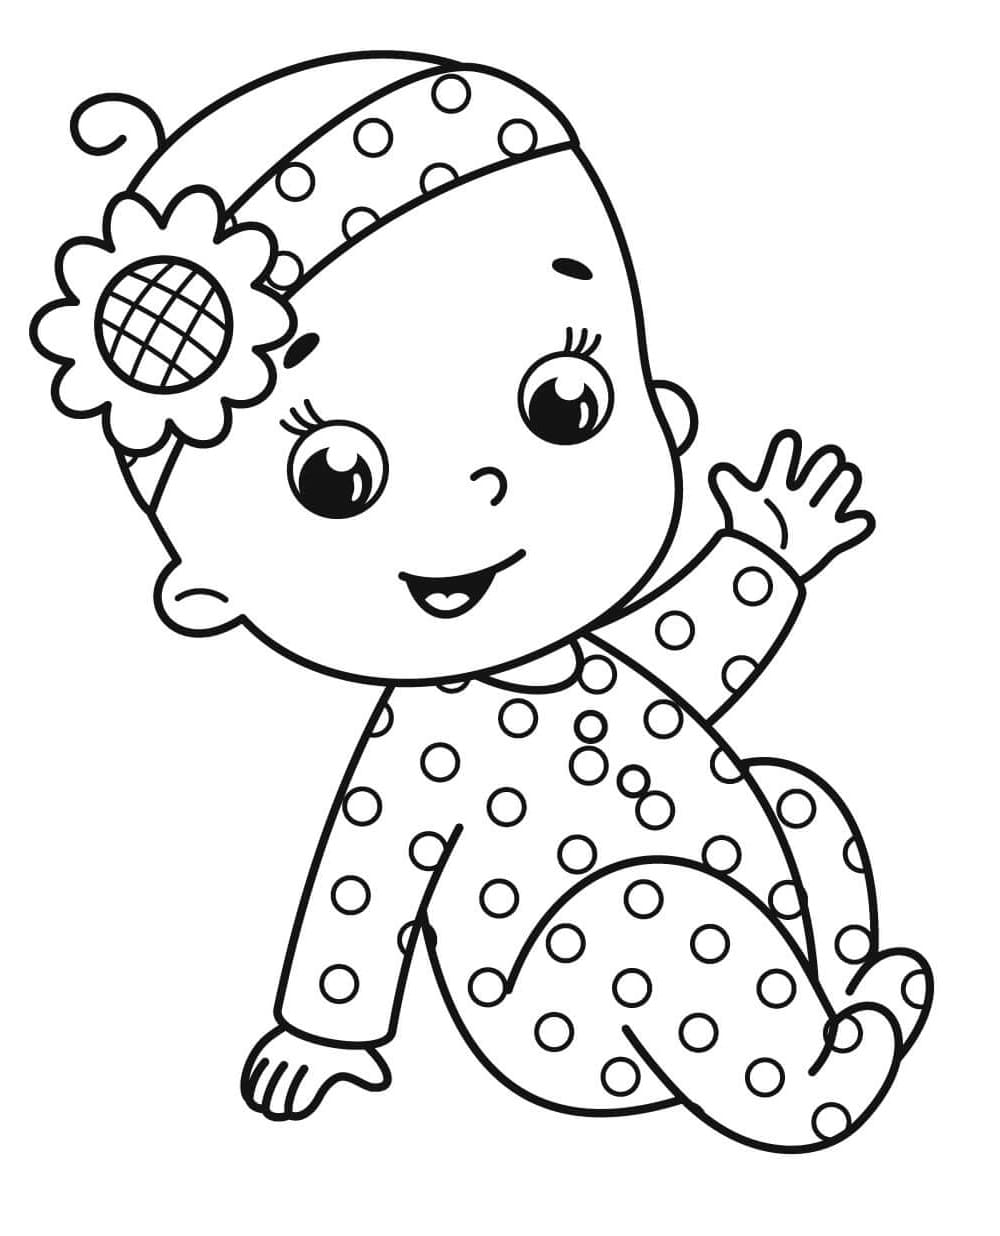 Kawaii Baby Girl Coloring Page Free Printable Coloring Pages For Kids